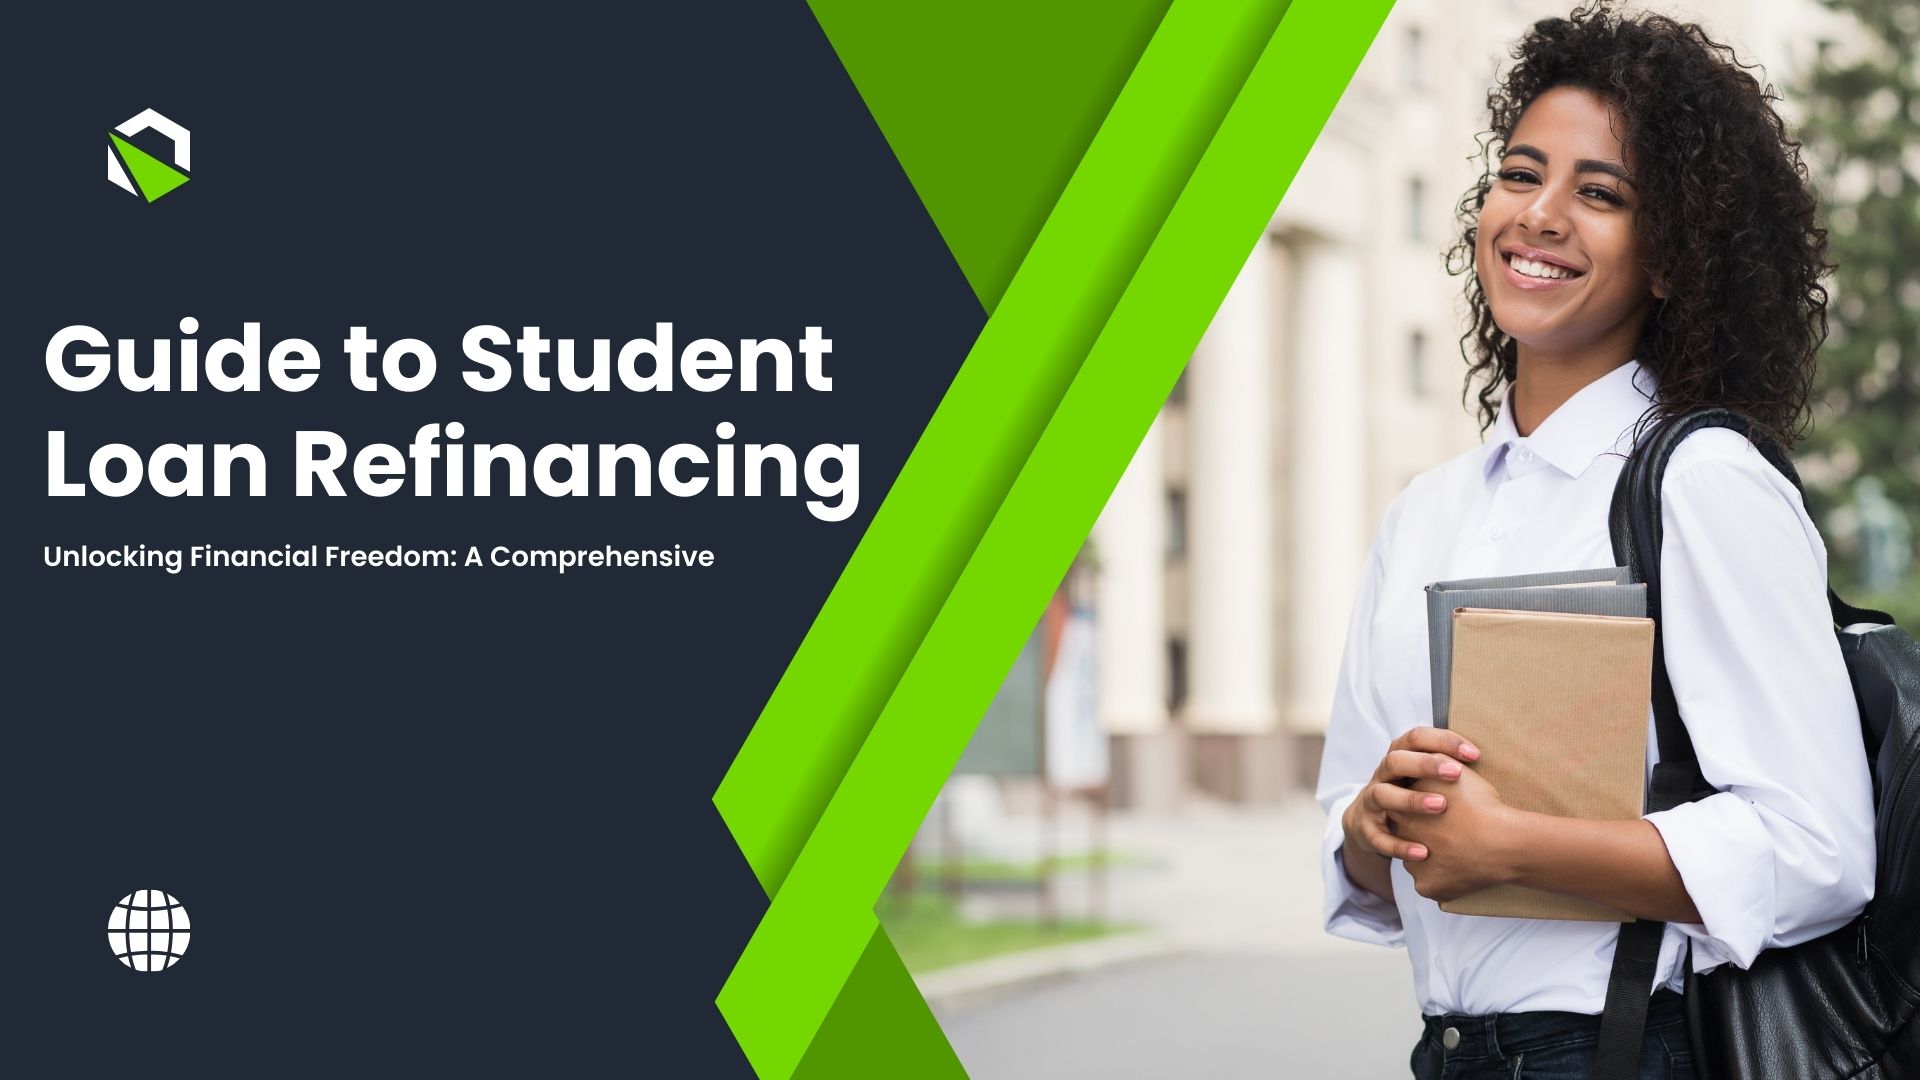 Unlocking Financial Freedom: A Comprehensive Guide to Student Loan Refinancing and FAQs